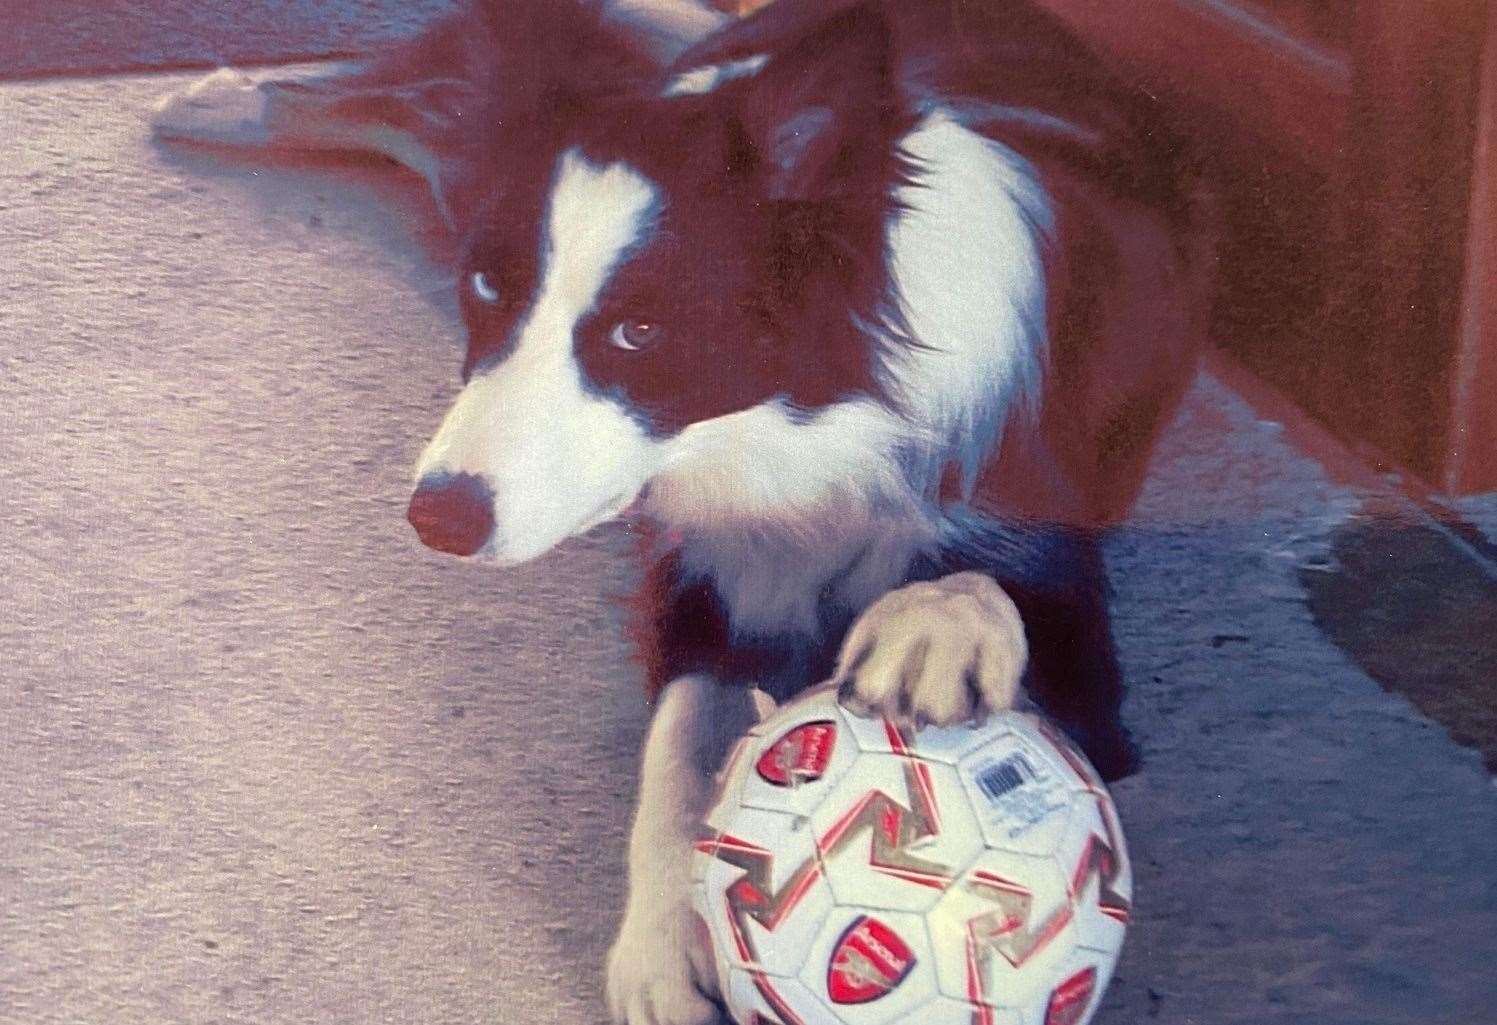 Border collie Lucy loved playing football